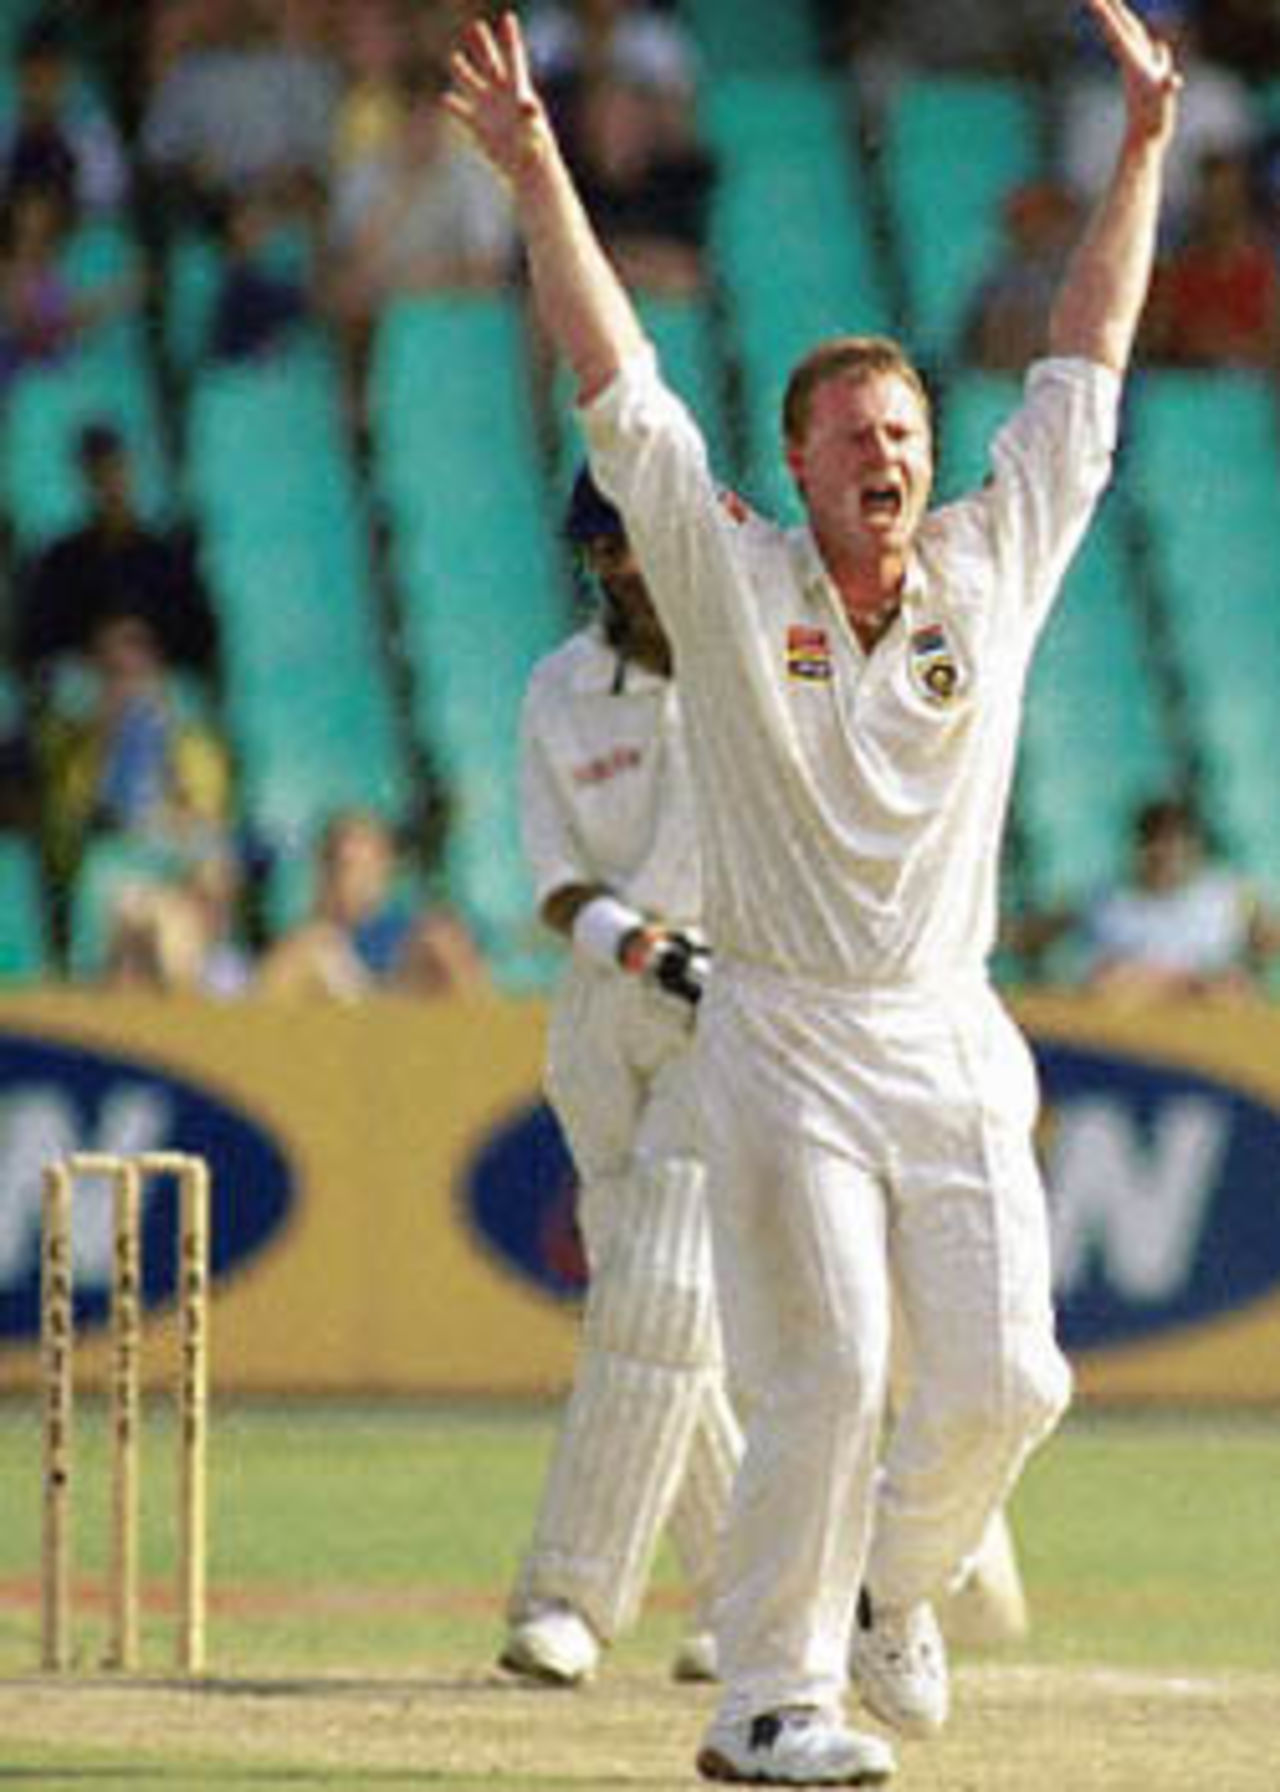 South African paceman Lance Klusener appeals for a caught behind during the first Test match between South Africa and Sri Lanka at Durban's Kingsmead stadium 30 December 2000. The match was drawn.